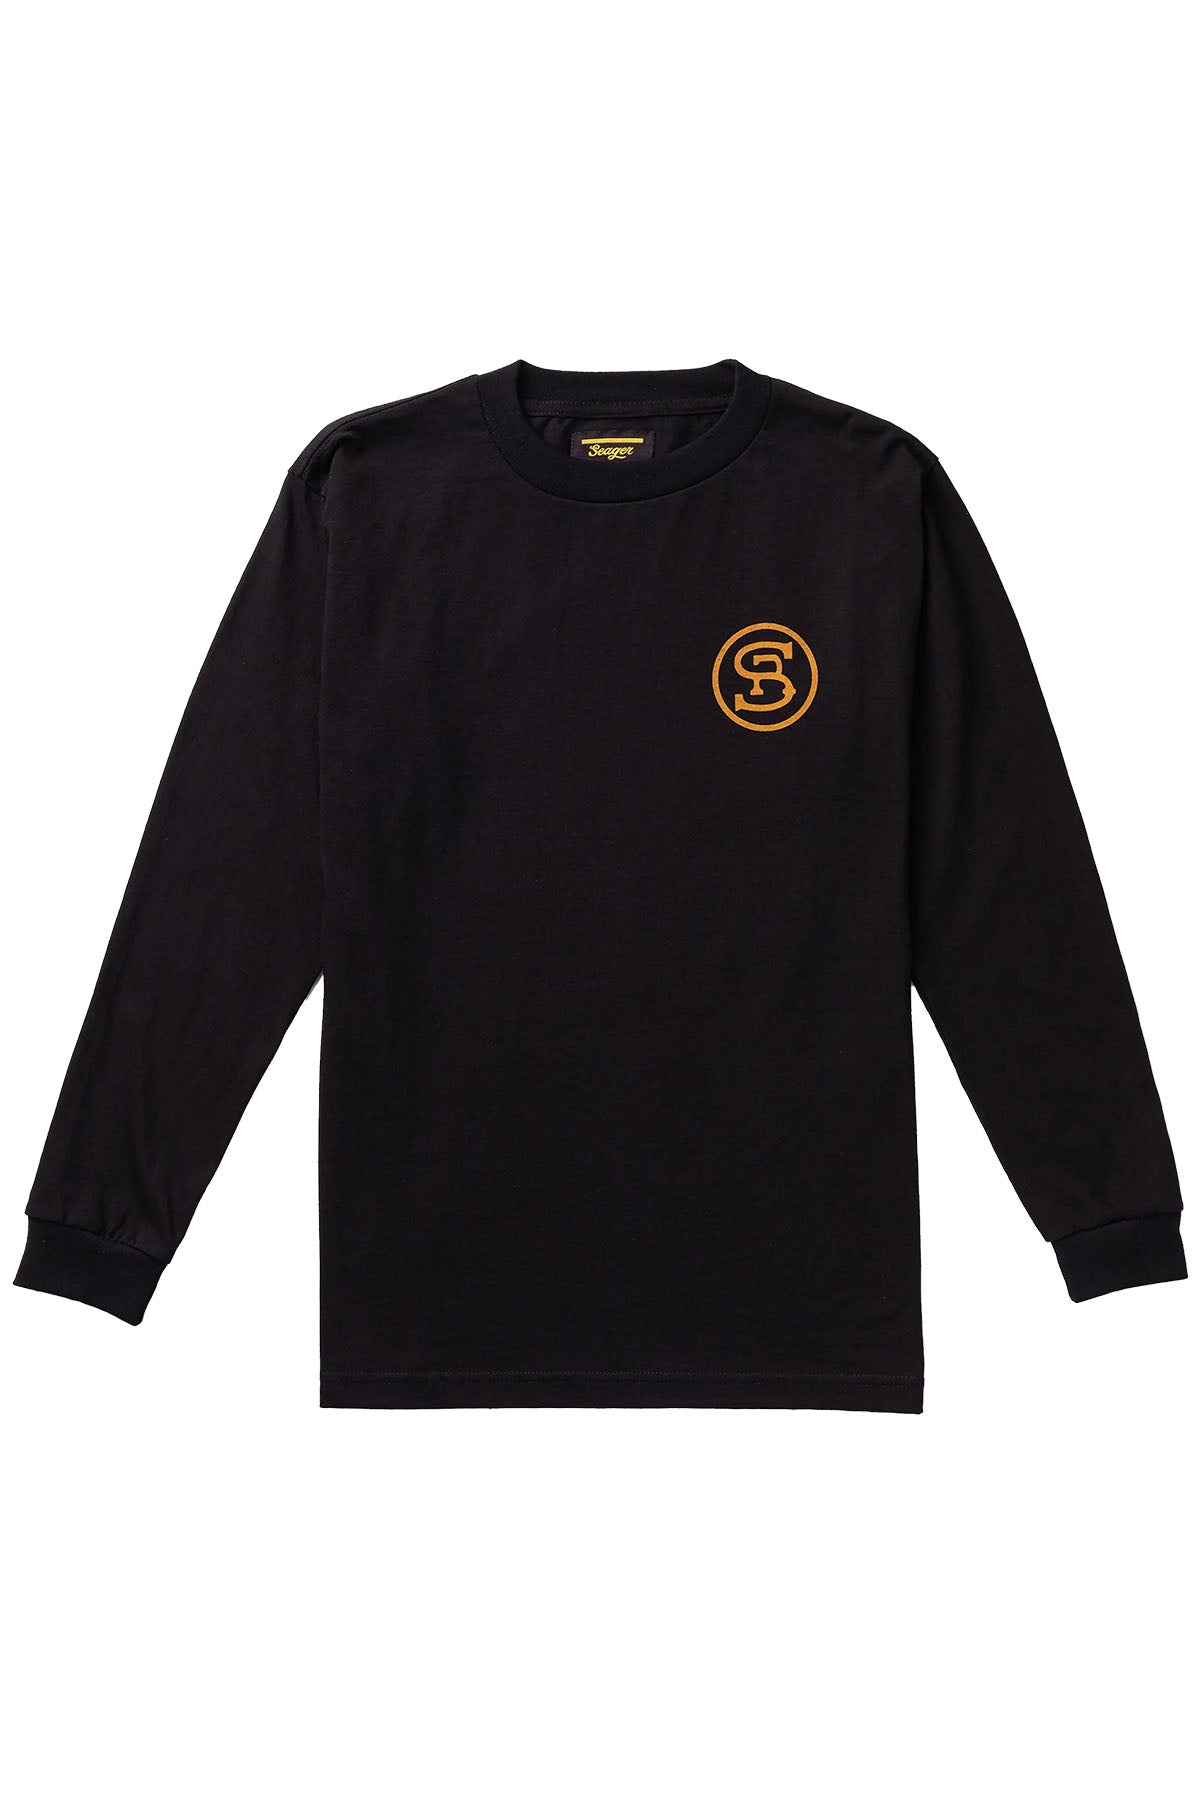 Seager - Ride for the Brand LS Tee - Black - Front